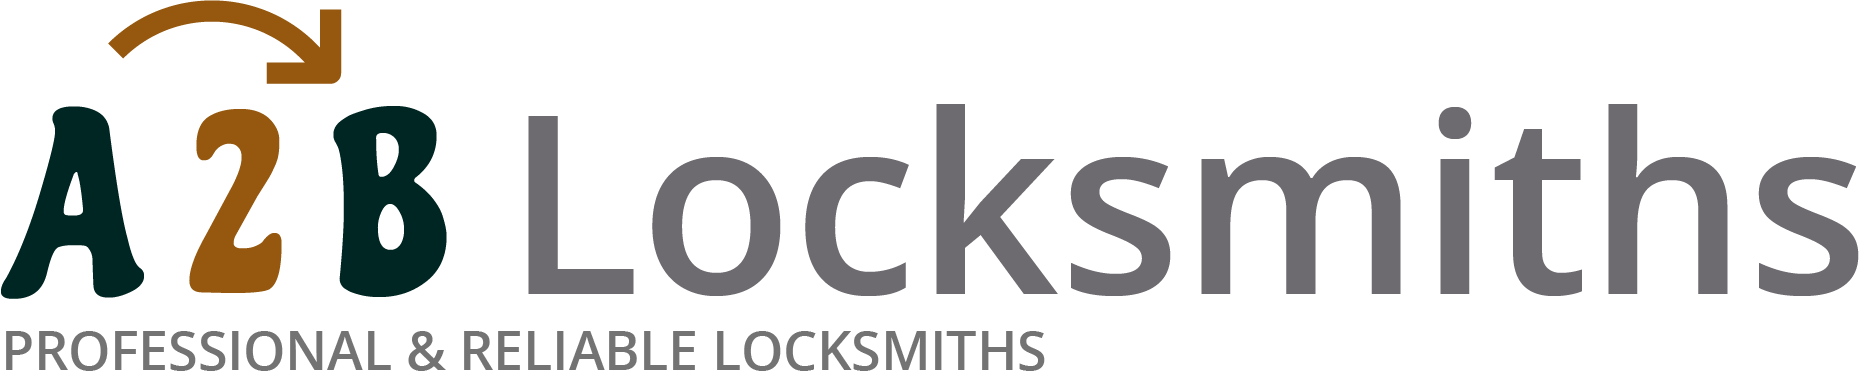 If you are locked out of house in Wolverhampton, our 24/7 local emergency locksmith services can help you.